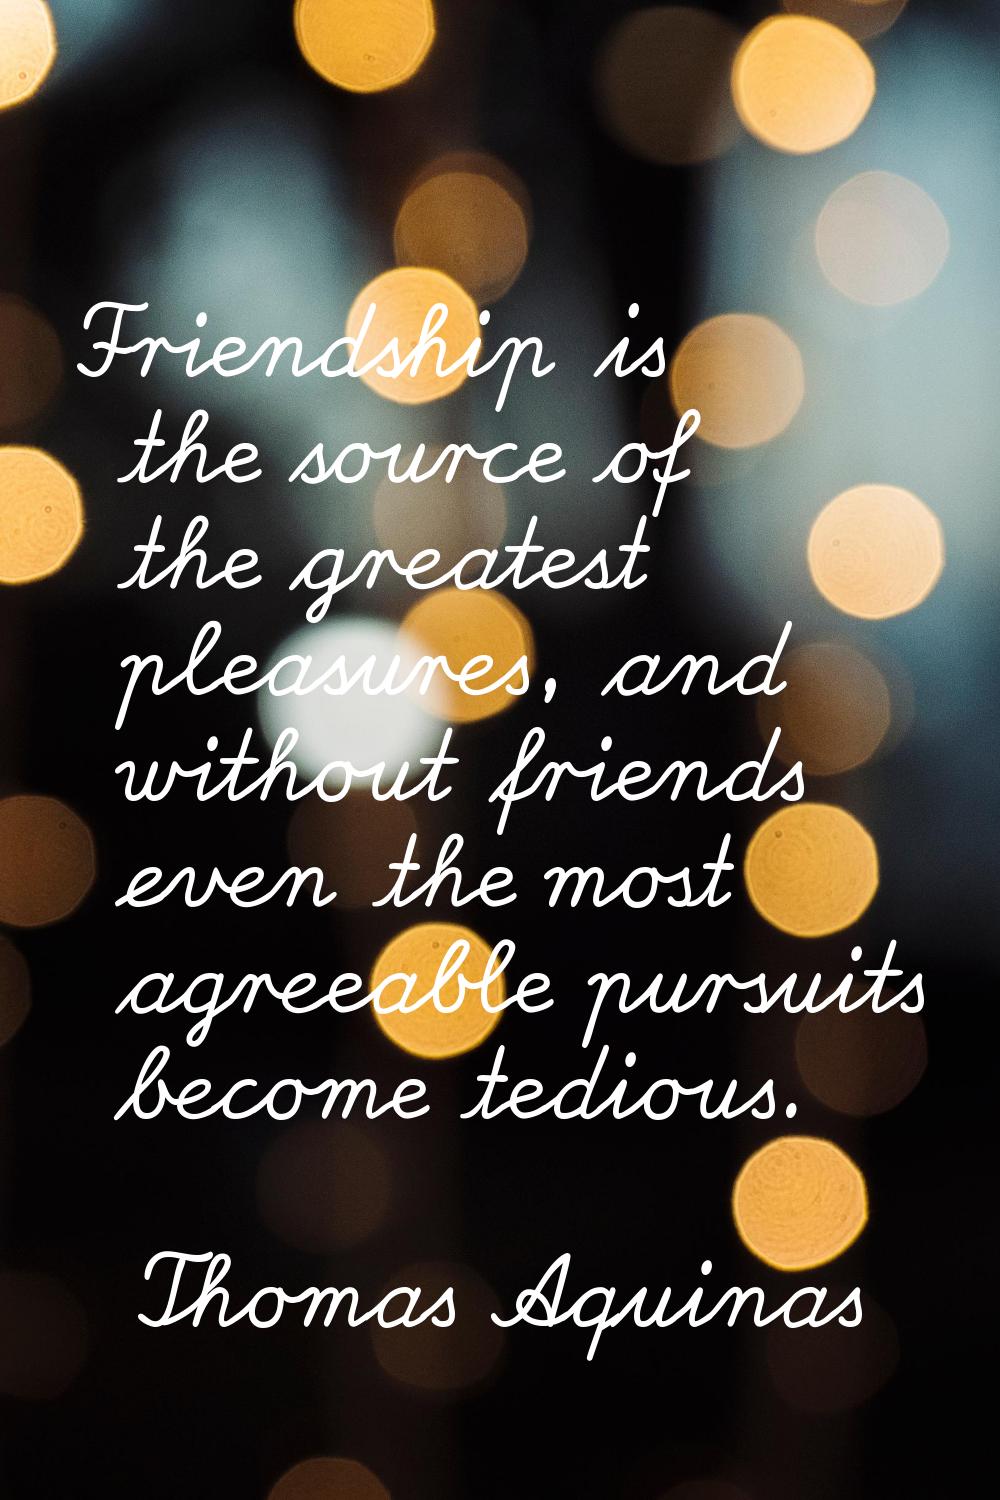 Friendship is the source of the greatest pleasures, and without friends even the most agreeable pur